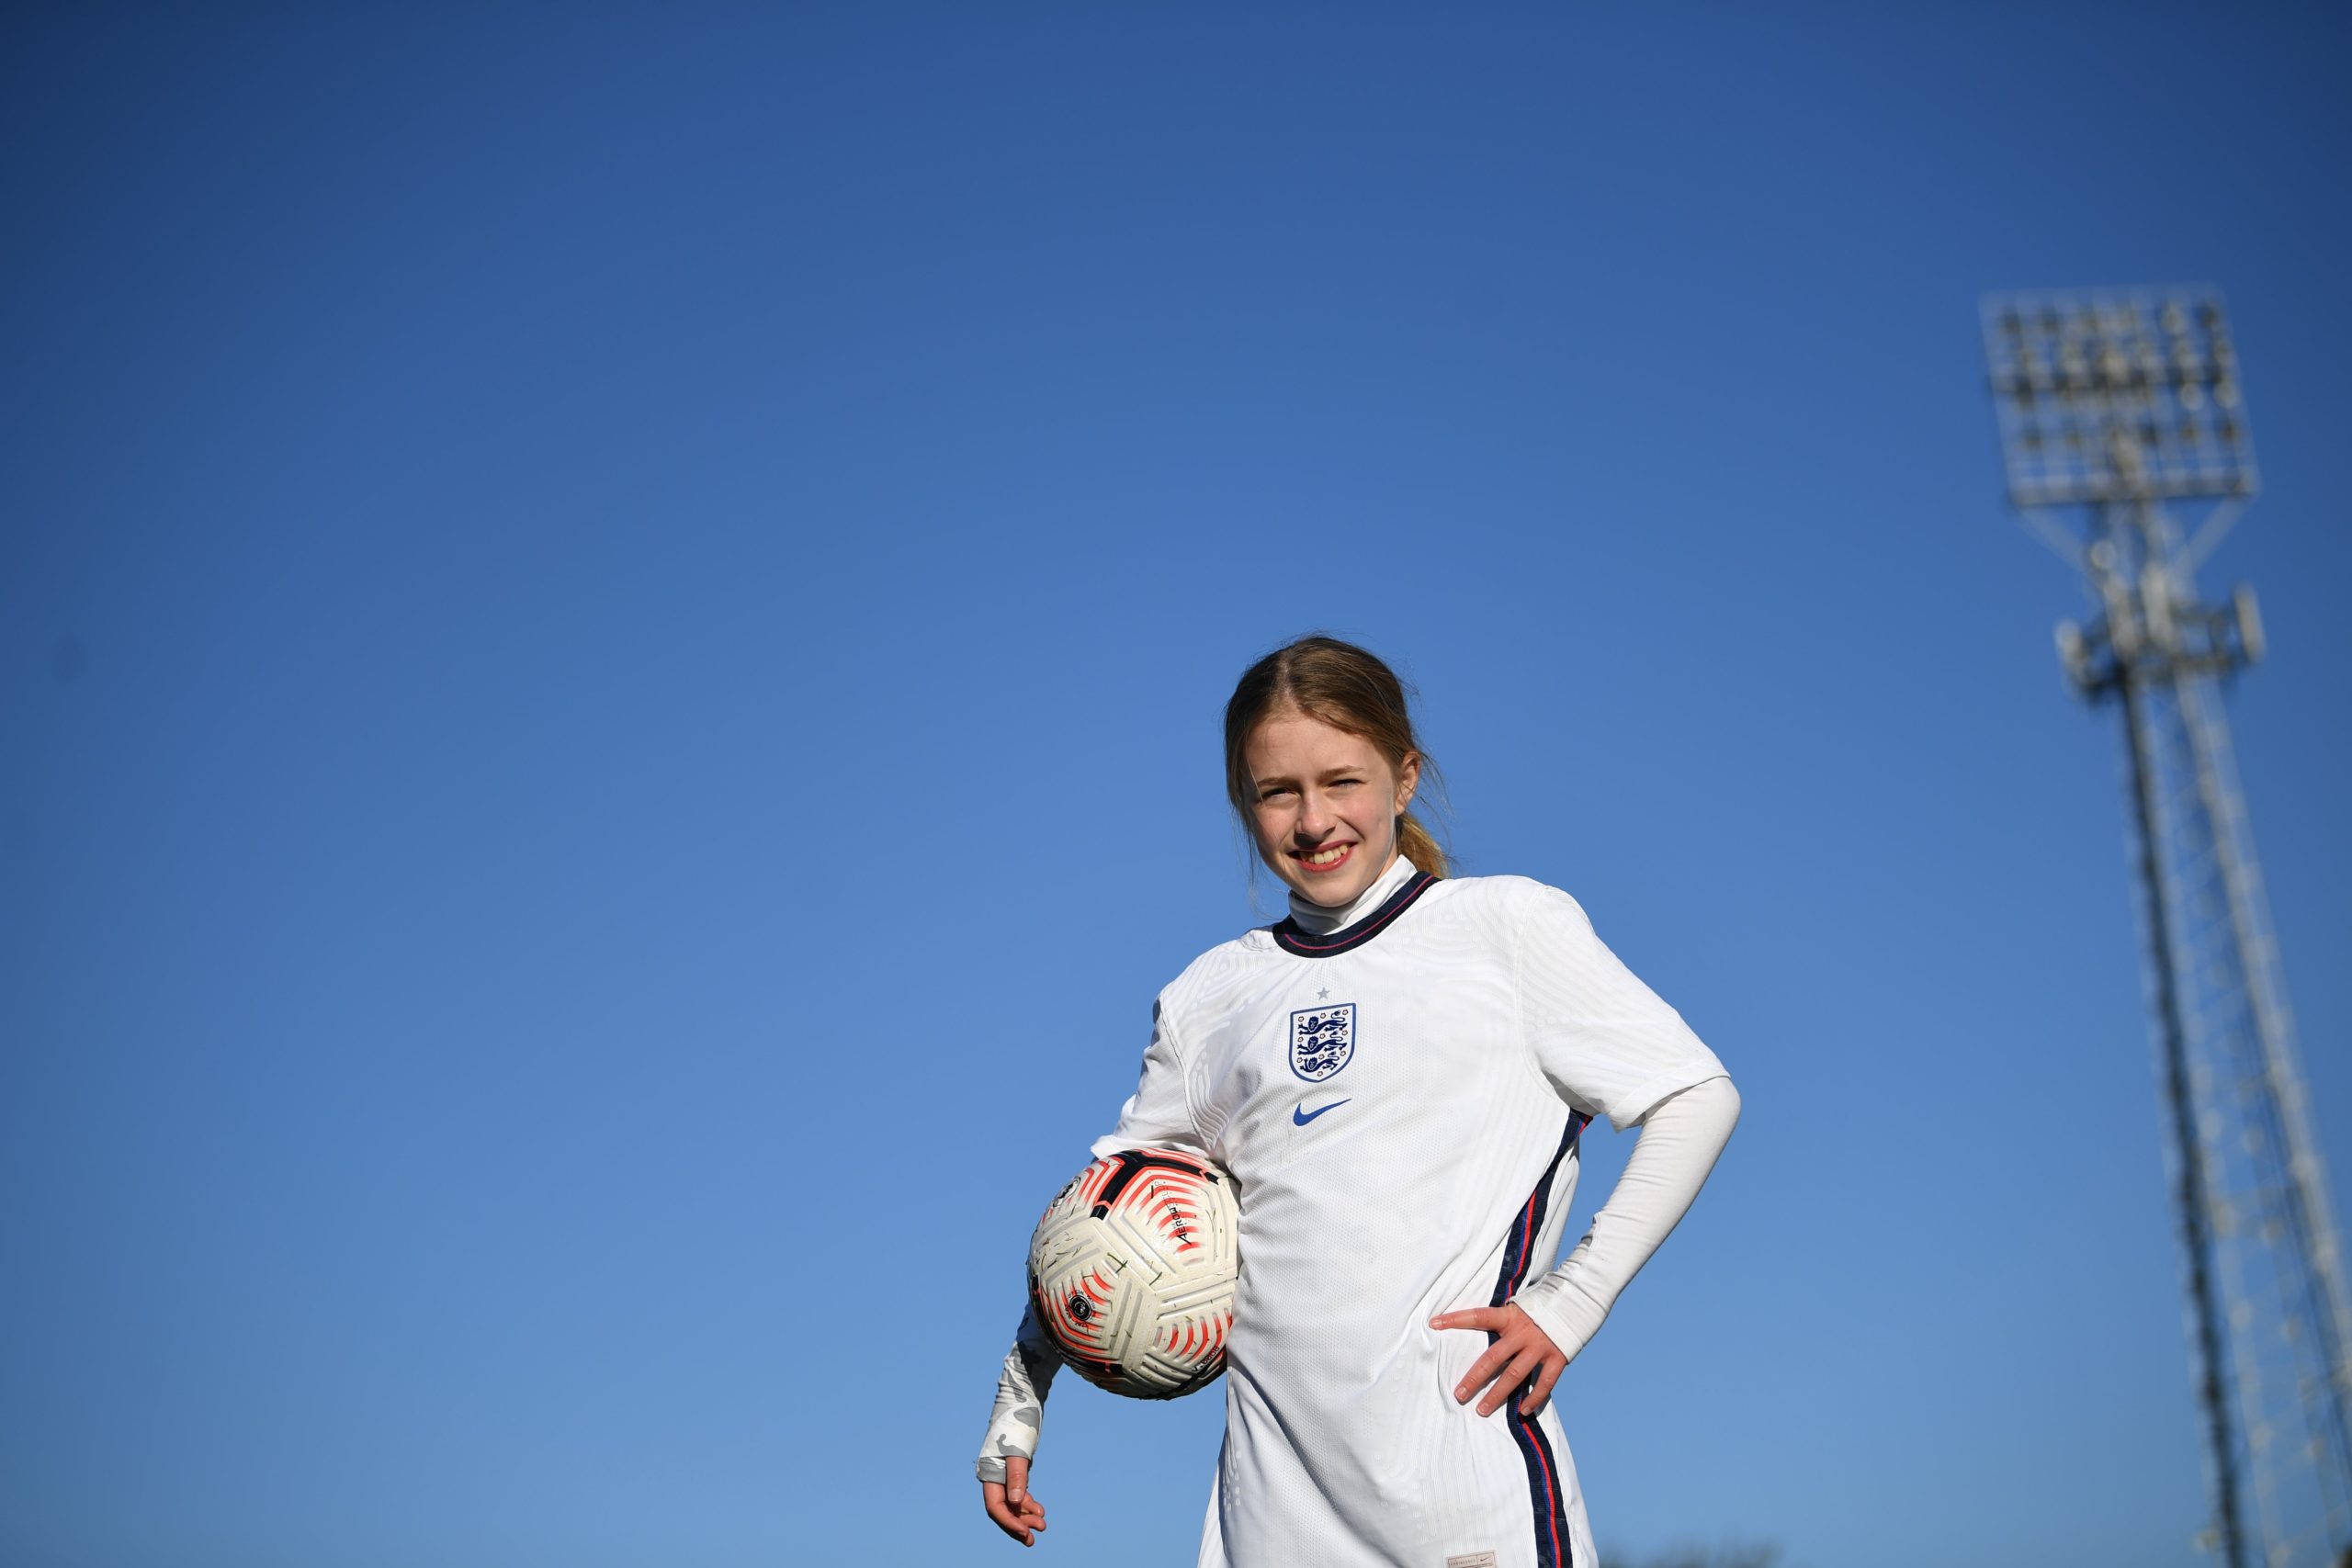 Imogen, 12 years old, nominated by Fifa for the award following the 7.1m keepyuppies challenge